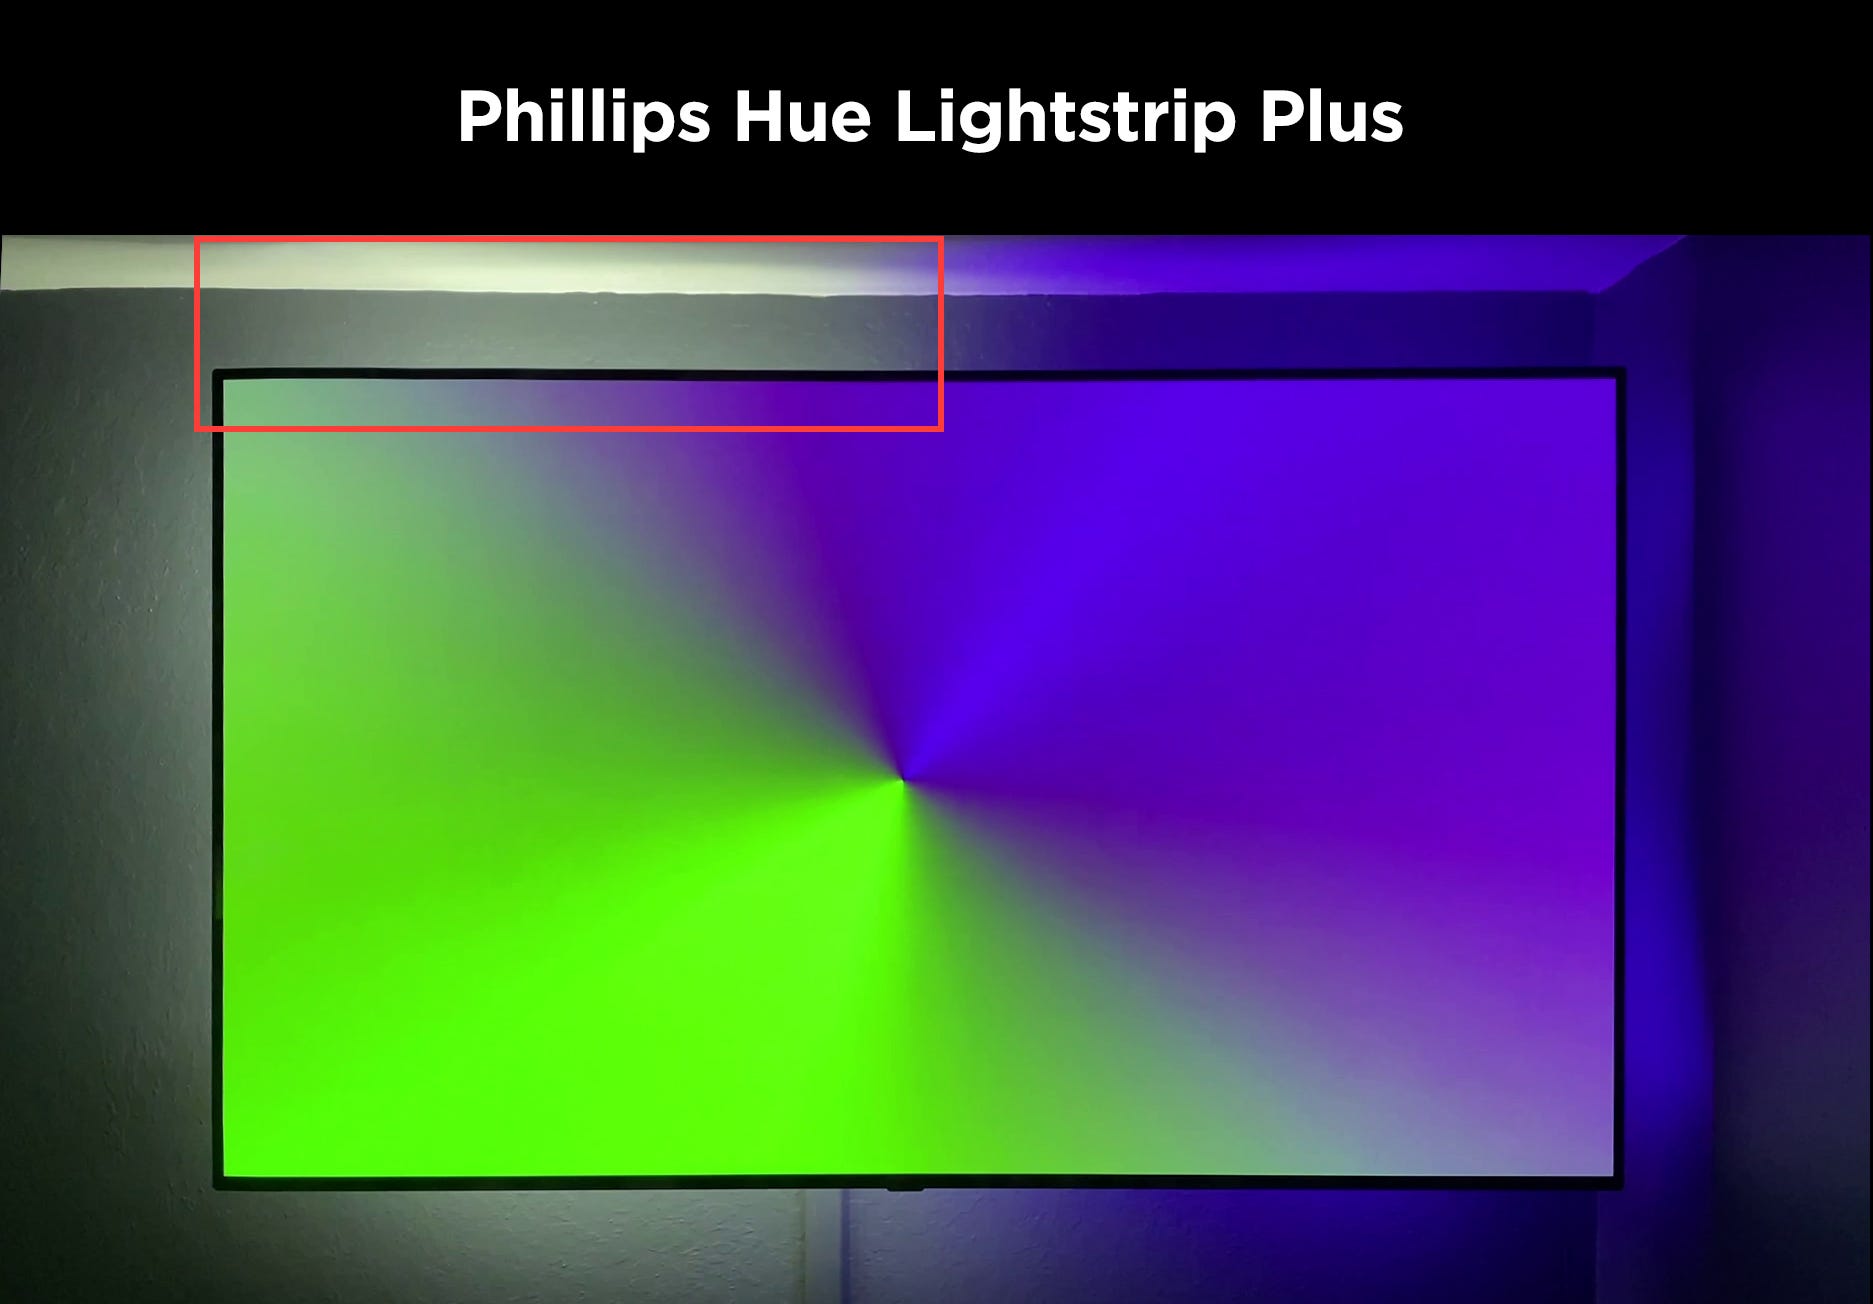 Bande lumineuse Philips Lightstrip Hue Play Gradient pour TV 55